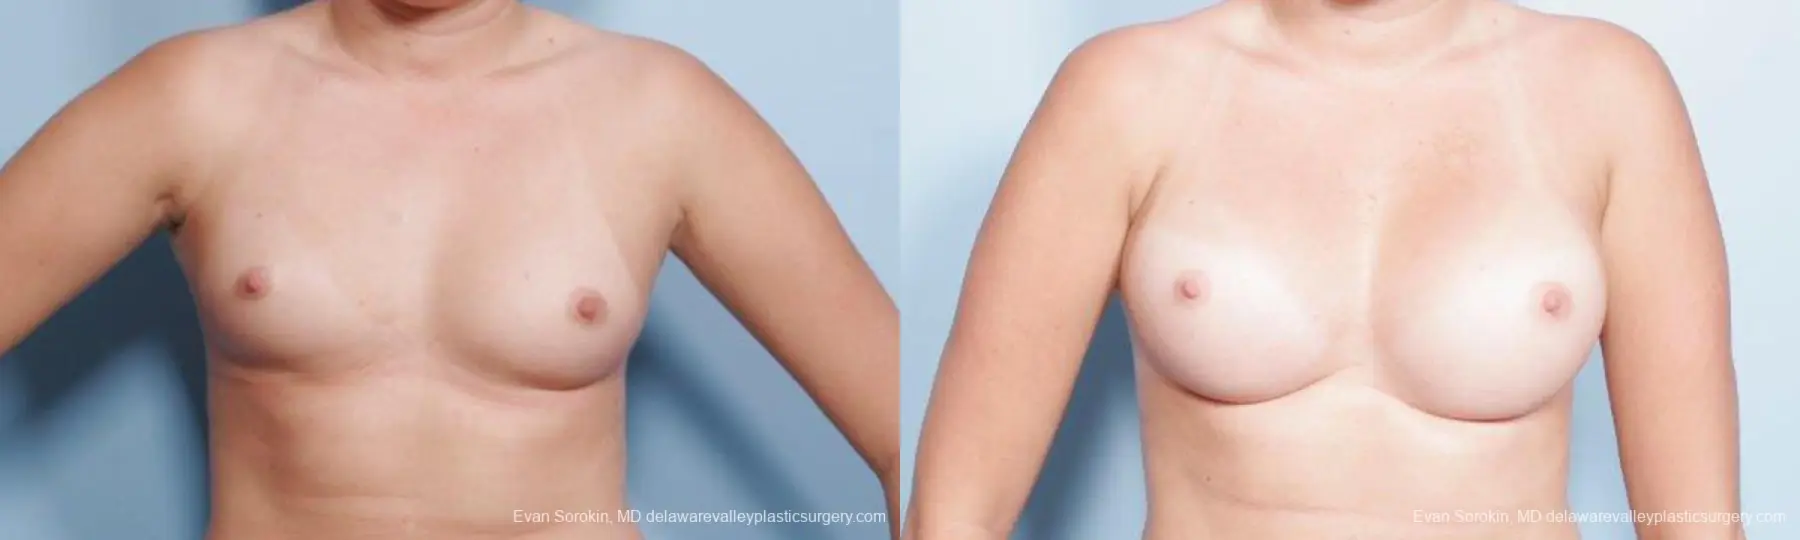 Philadelphia Breast Augmentation 9301 - Before and After 1